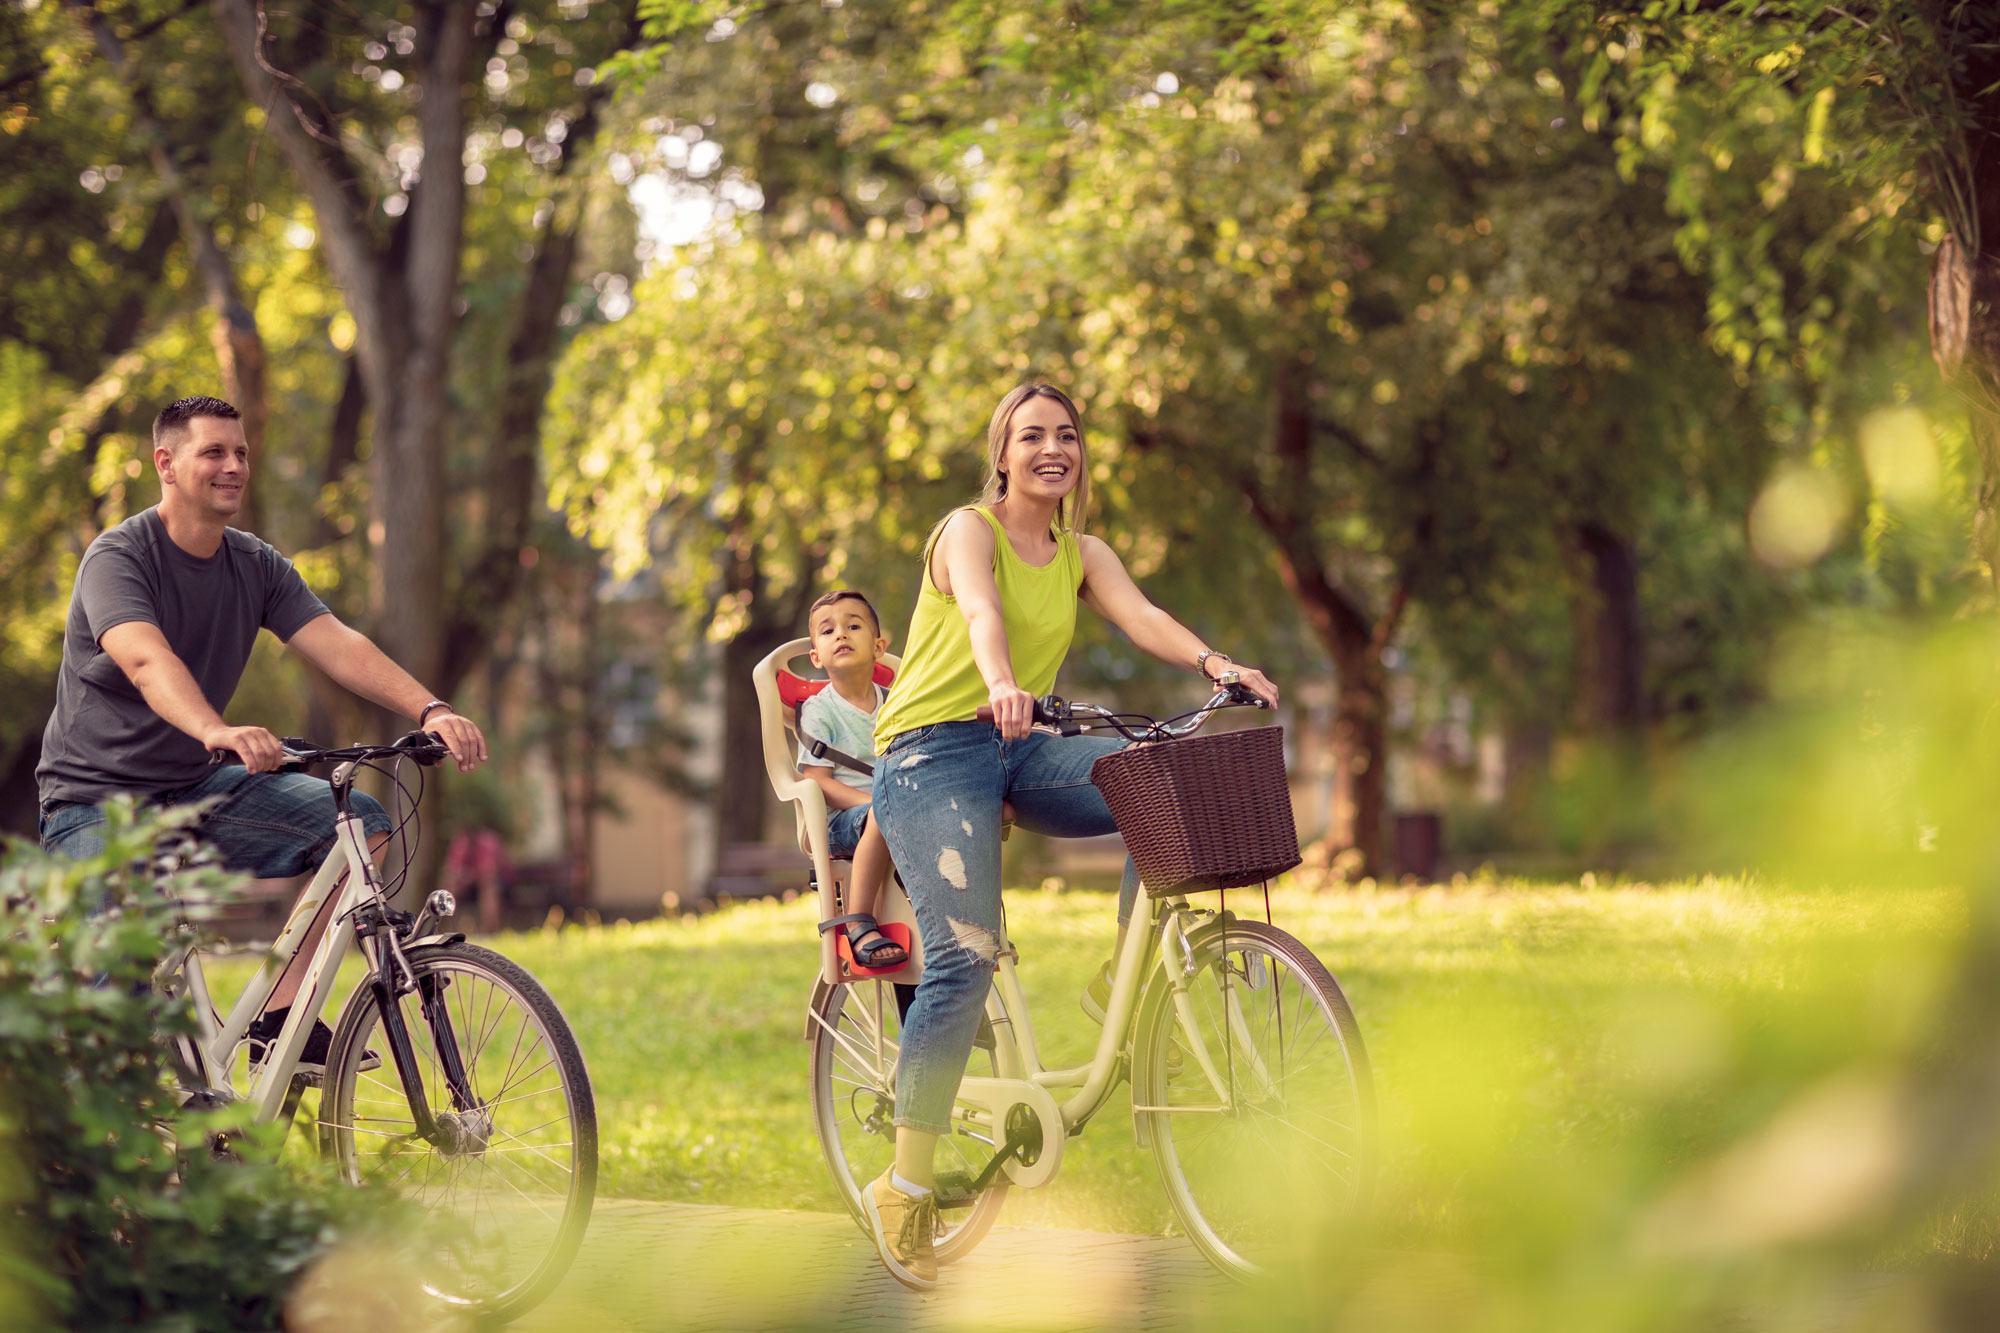 Smiling-father-and-mother-with-kid-on-bicycles-having-fun-in-park_By-Ljiljana